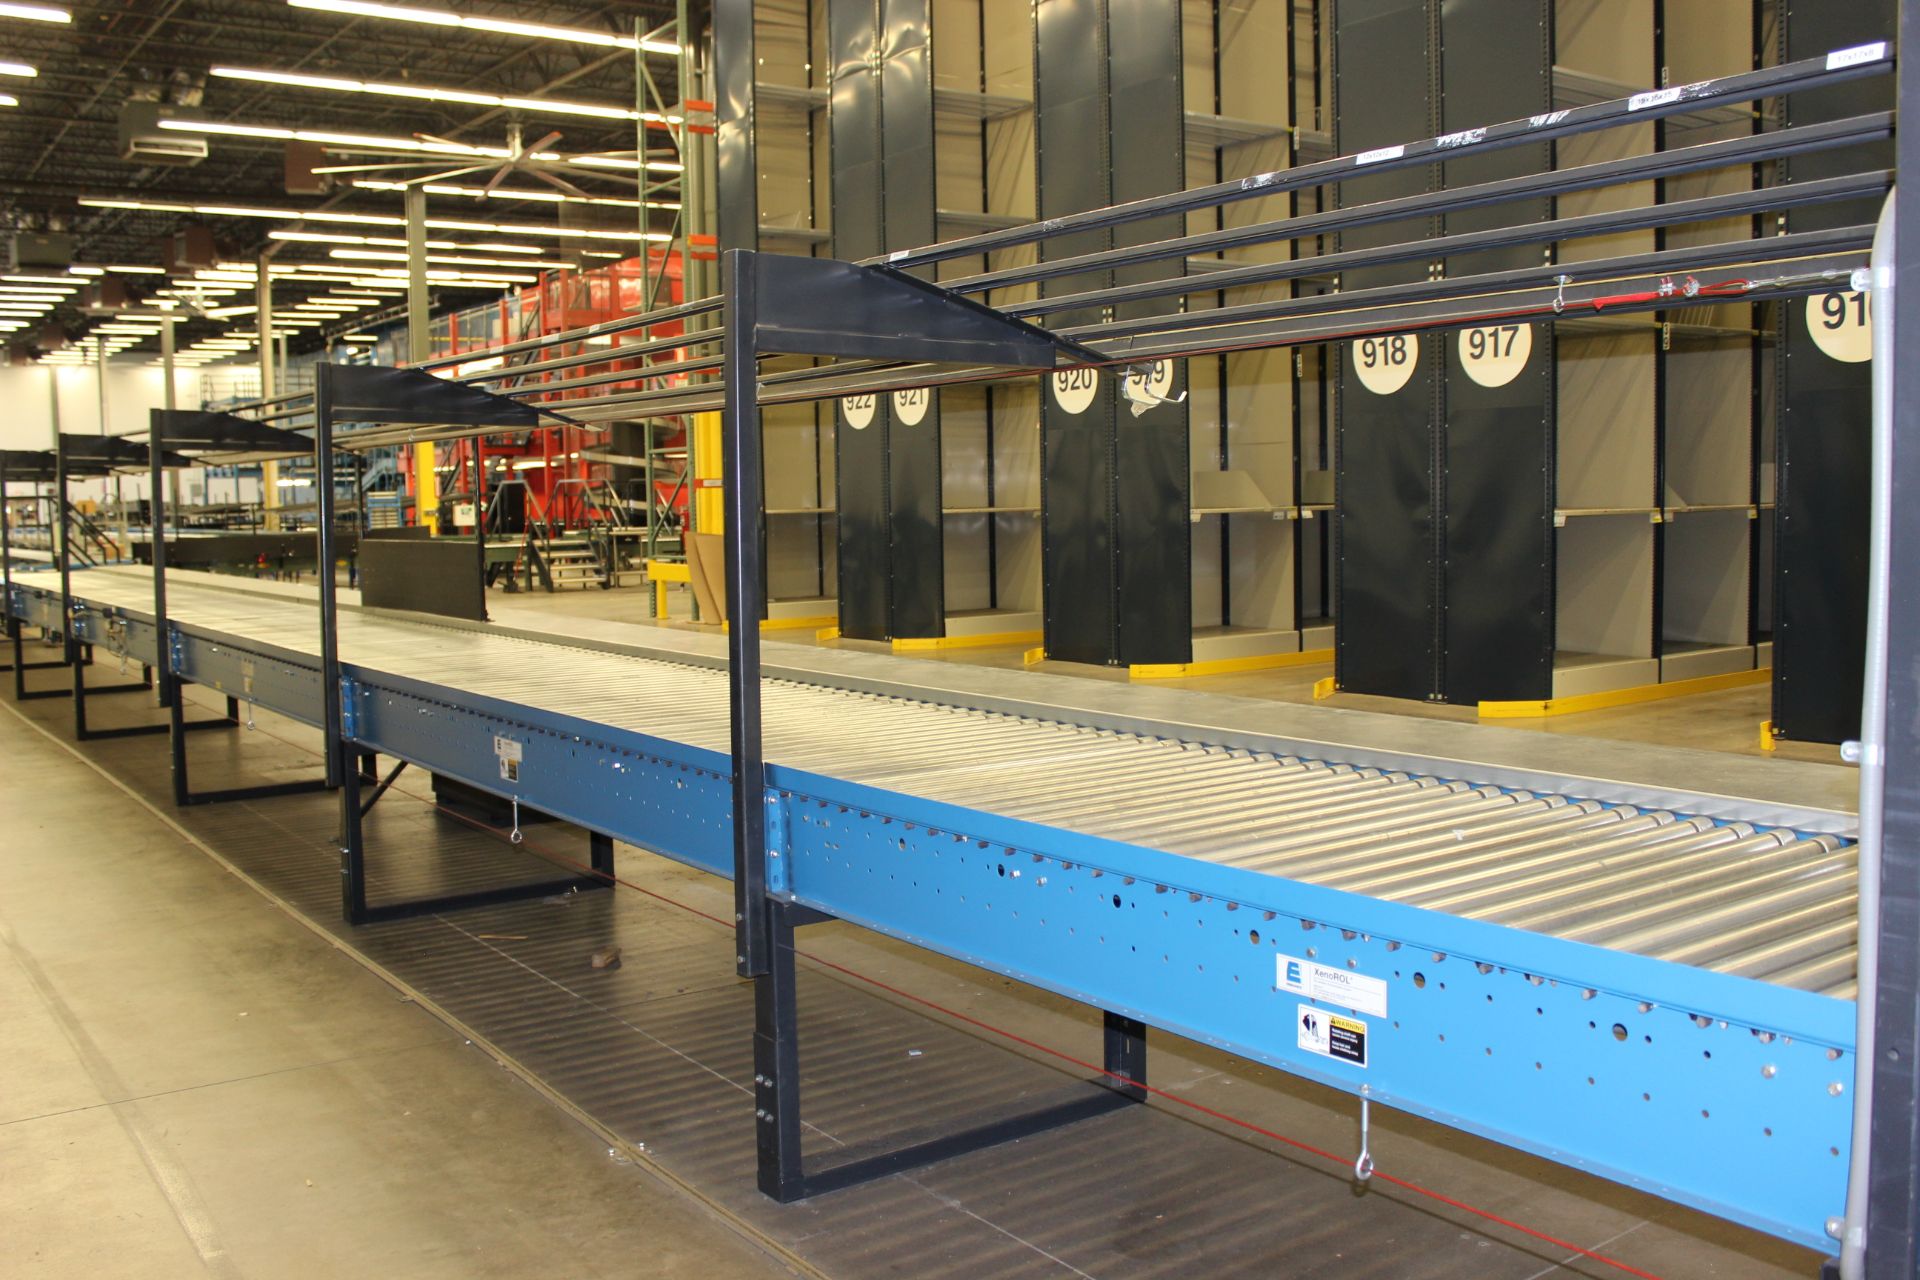 2002 XENOROL XR48 60 FT LONG X 42" WIDE, LINE-SHAFT-DRIVEN LIVE ROLLER CONVEYOR CLICK TO WATCH VIDEO - Image 3 of 4